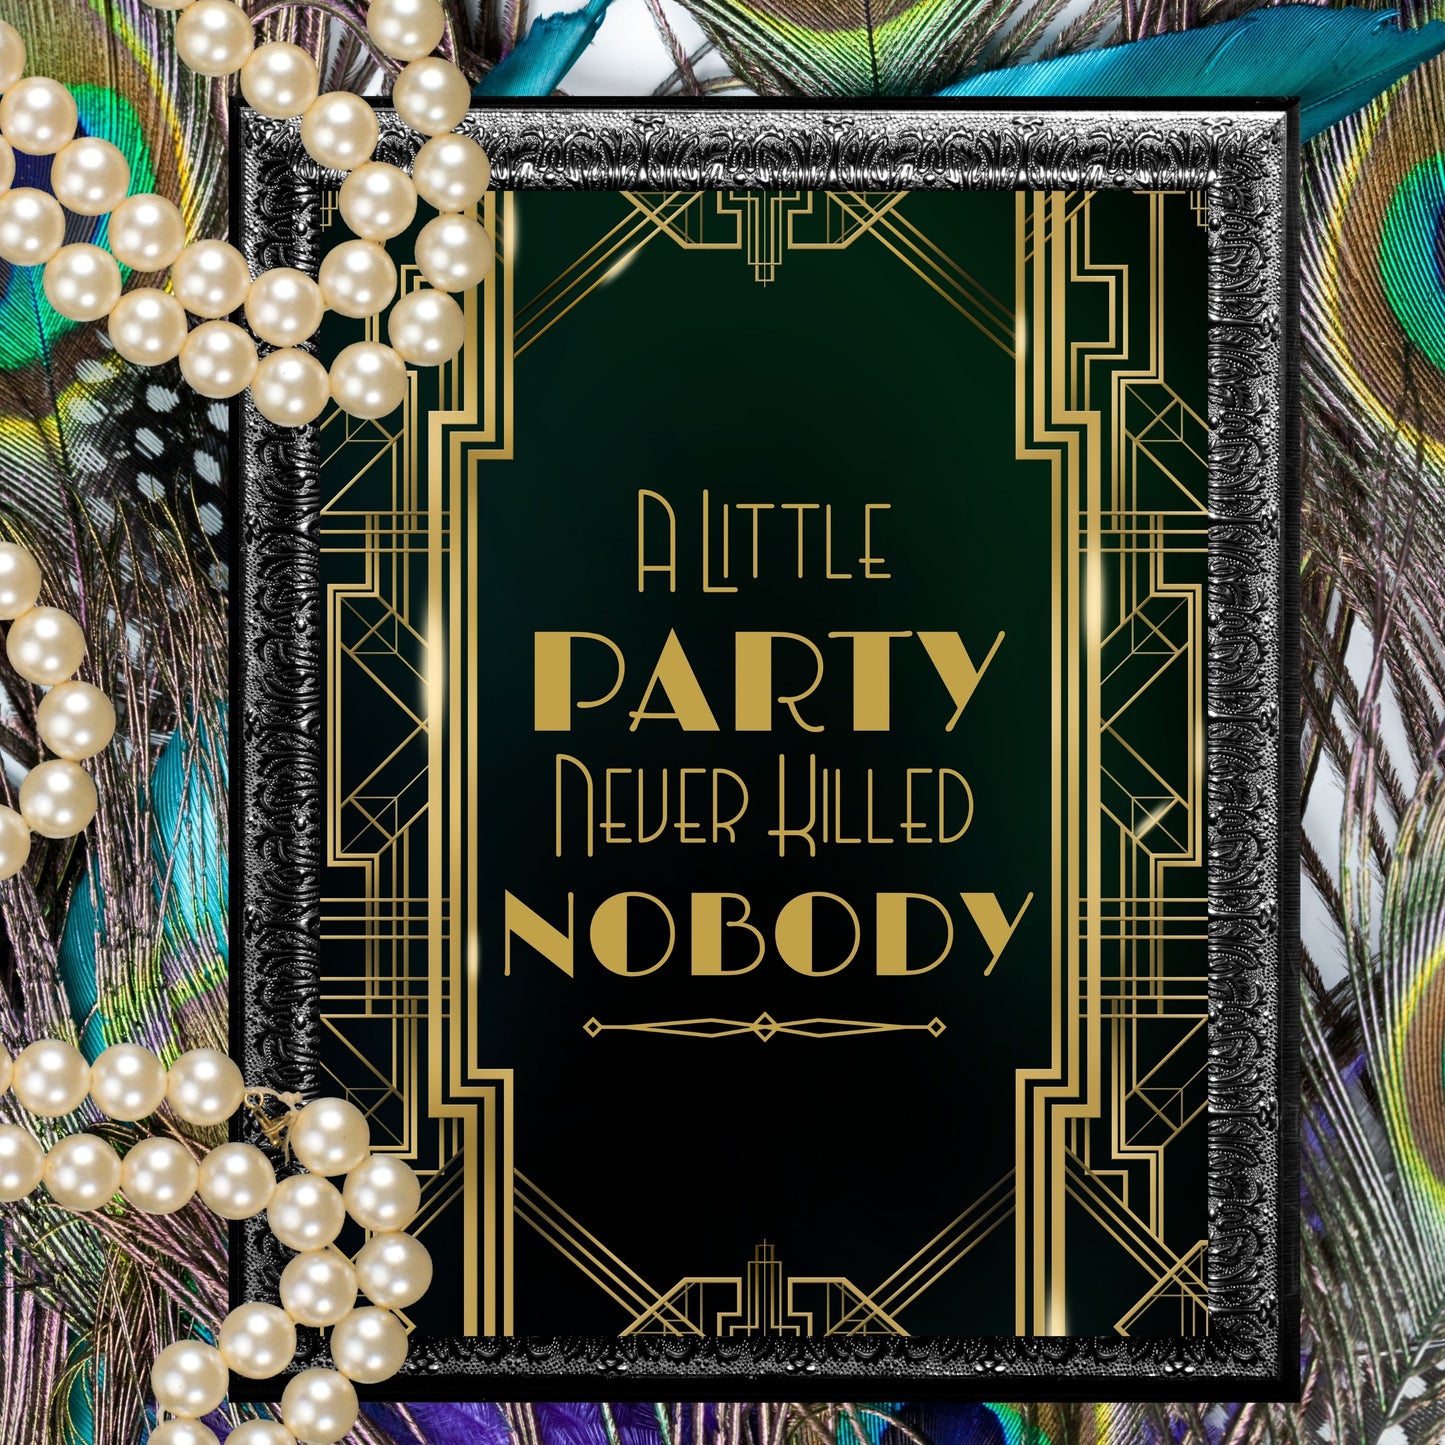 "A Little Party Never Killed Nobody" Art Deco Printable Party Sign For Great Gatsby or Roaring 20's Party Or Wedding, Black & Gold, Printable Party Decor